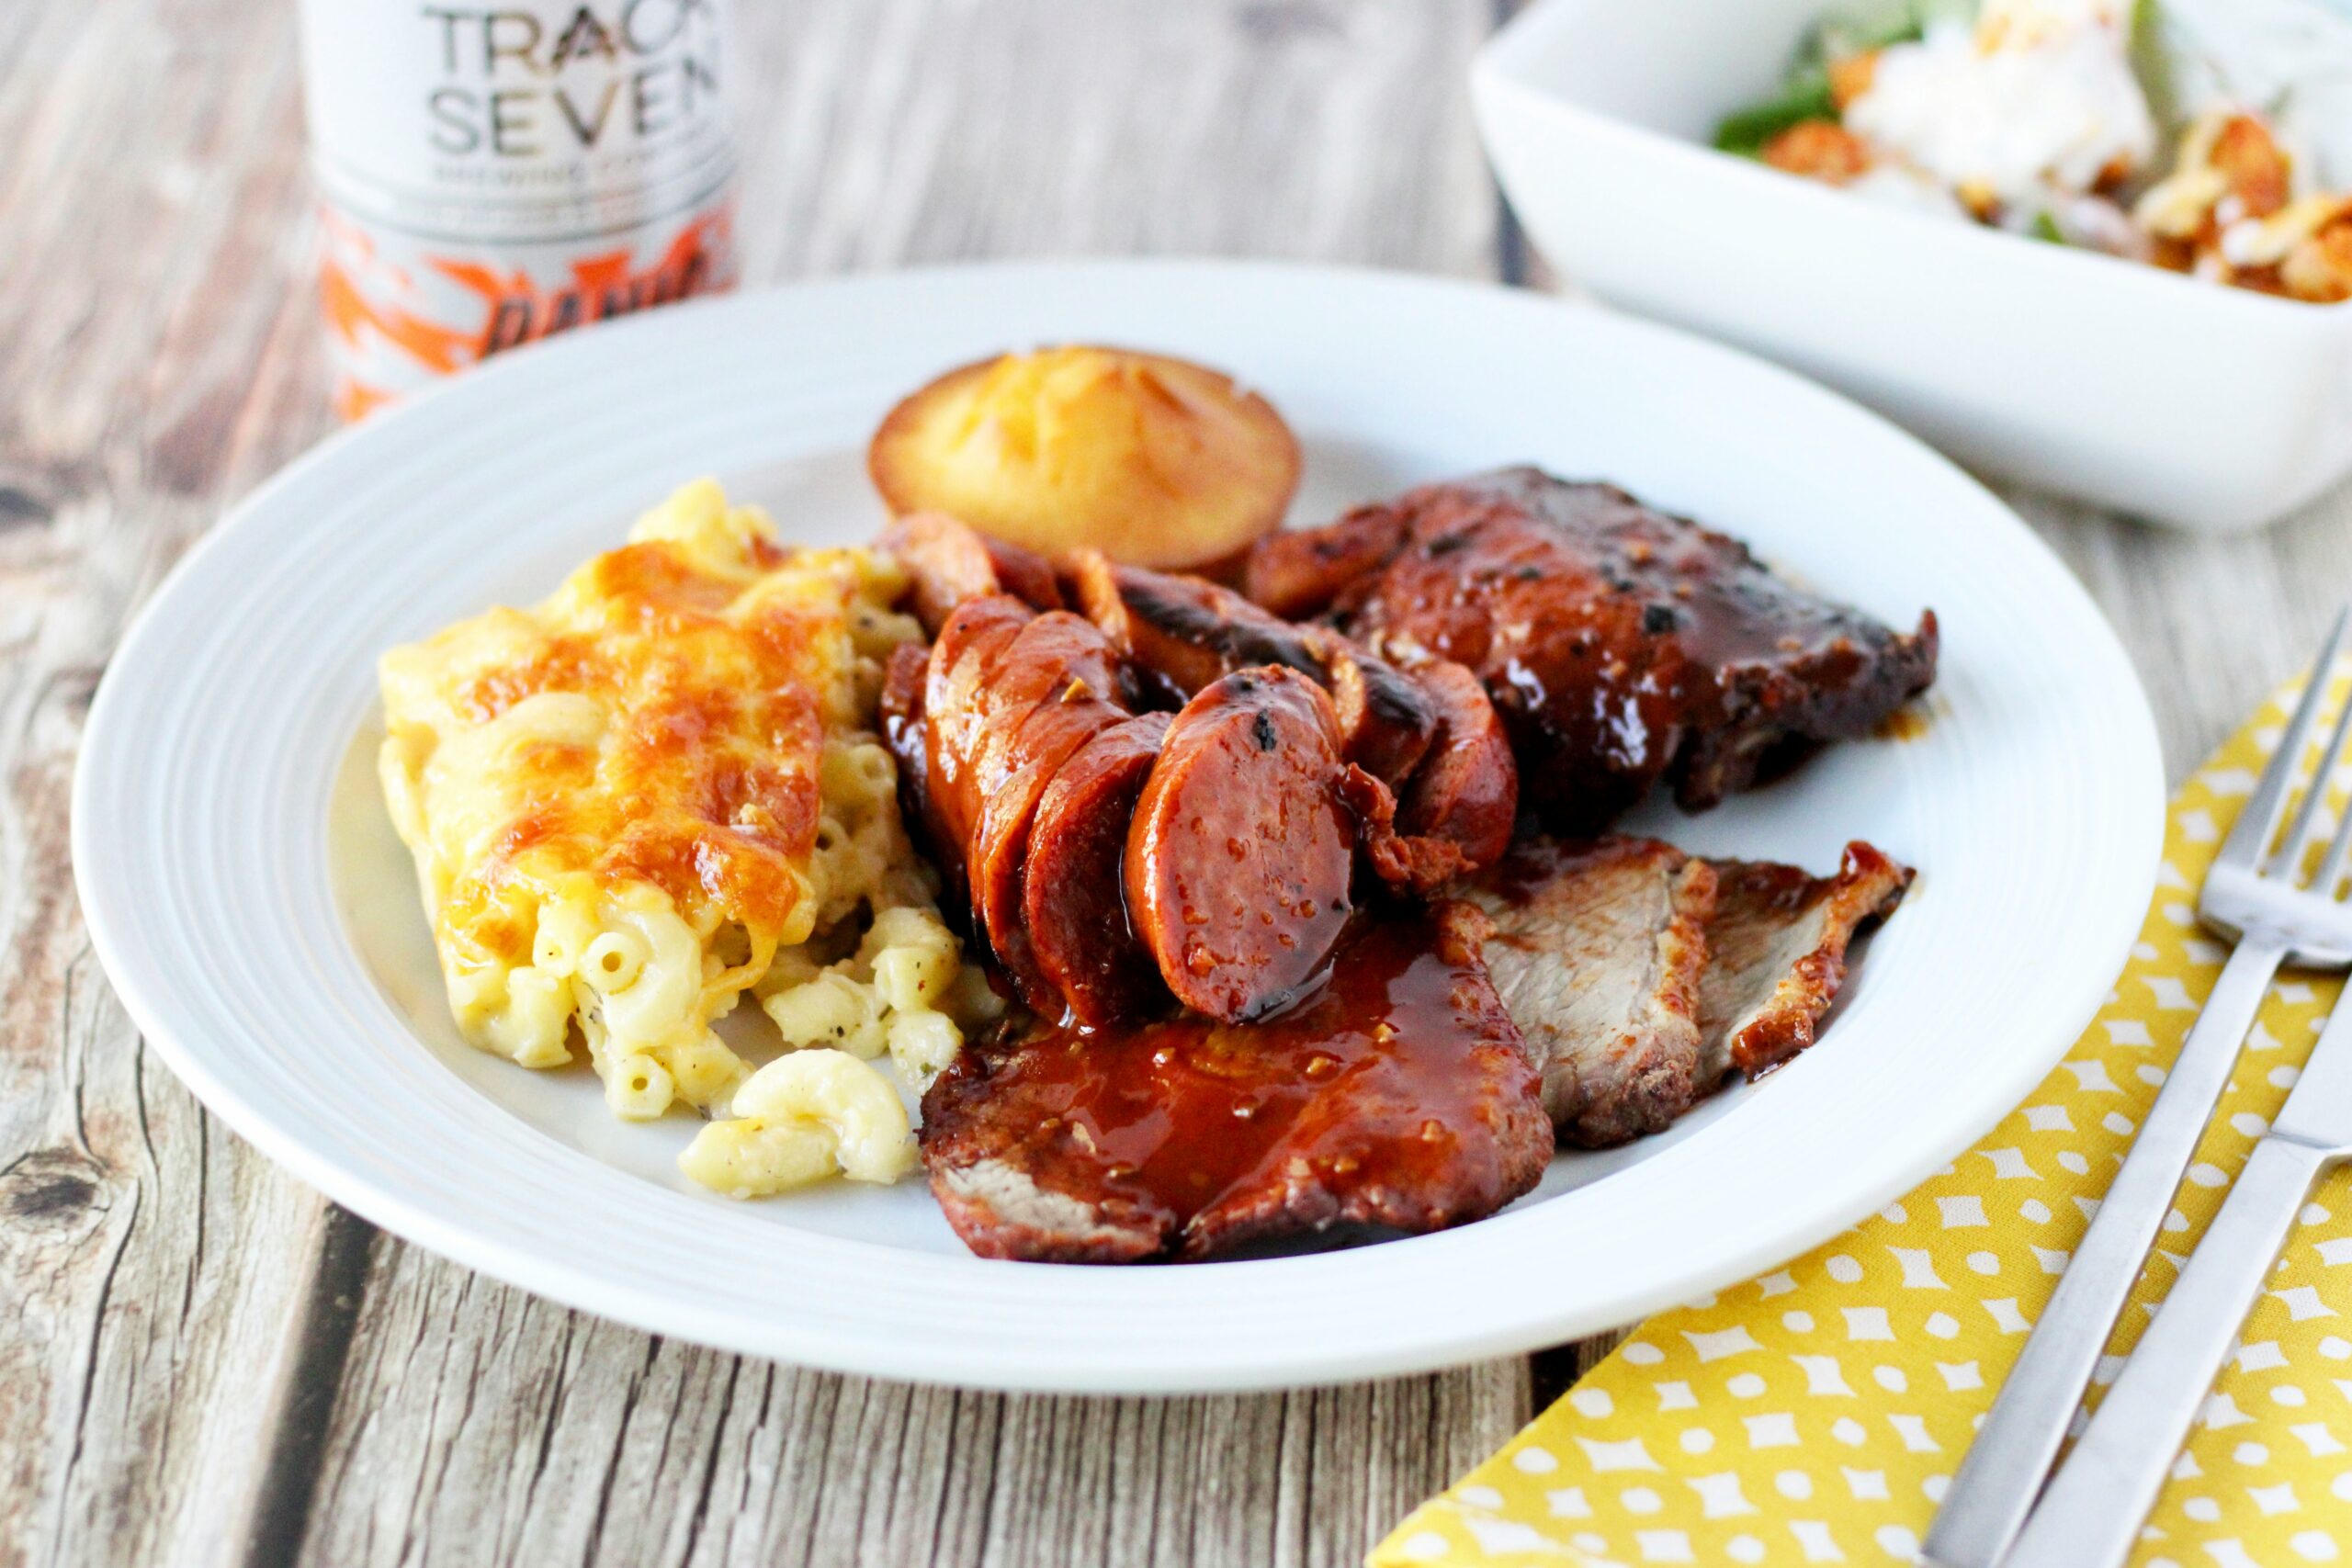 Use a soul food theme for your next easy Sunday dinner idea. Pictured: soul food